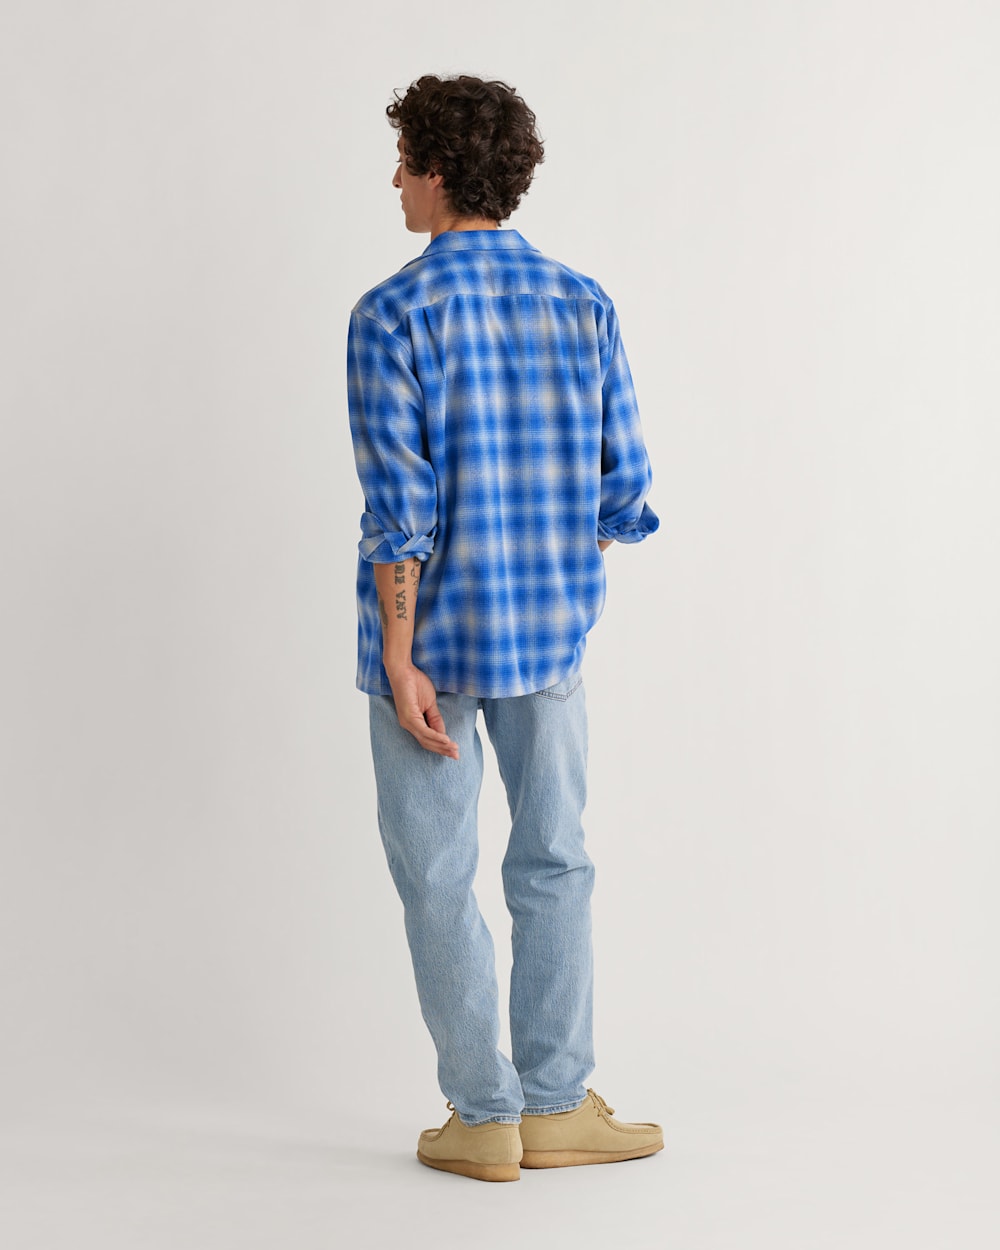 ALTERNATE VIEW OF MEN'S PLAID BOARD SHIRT IN BLUE OMBRE image number 3